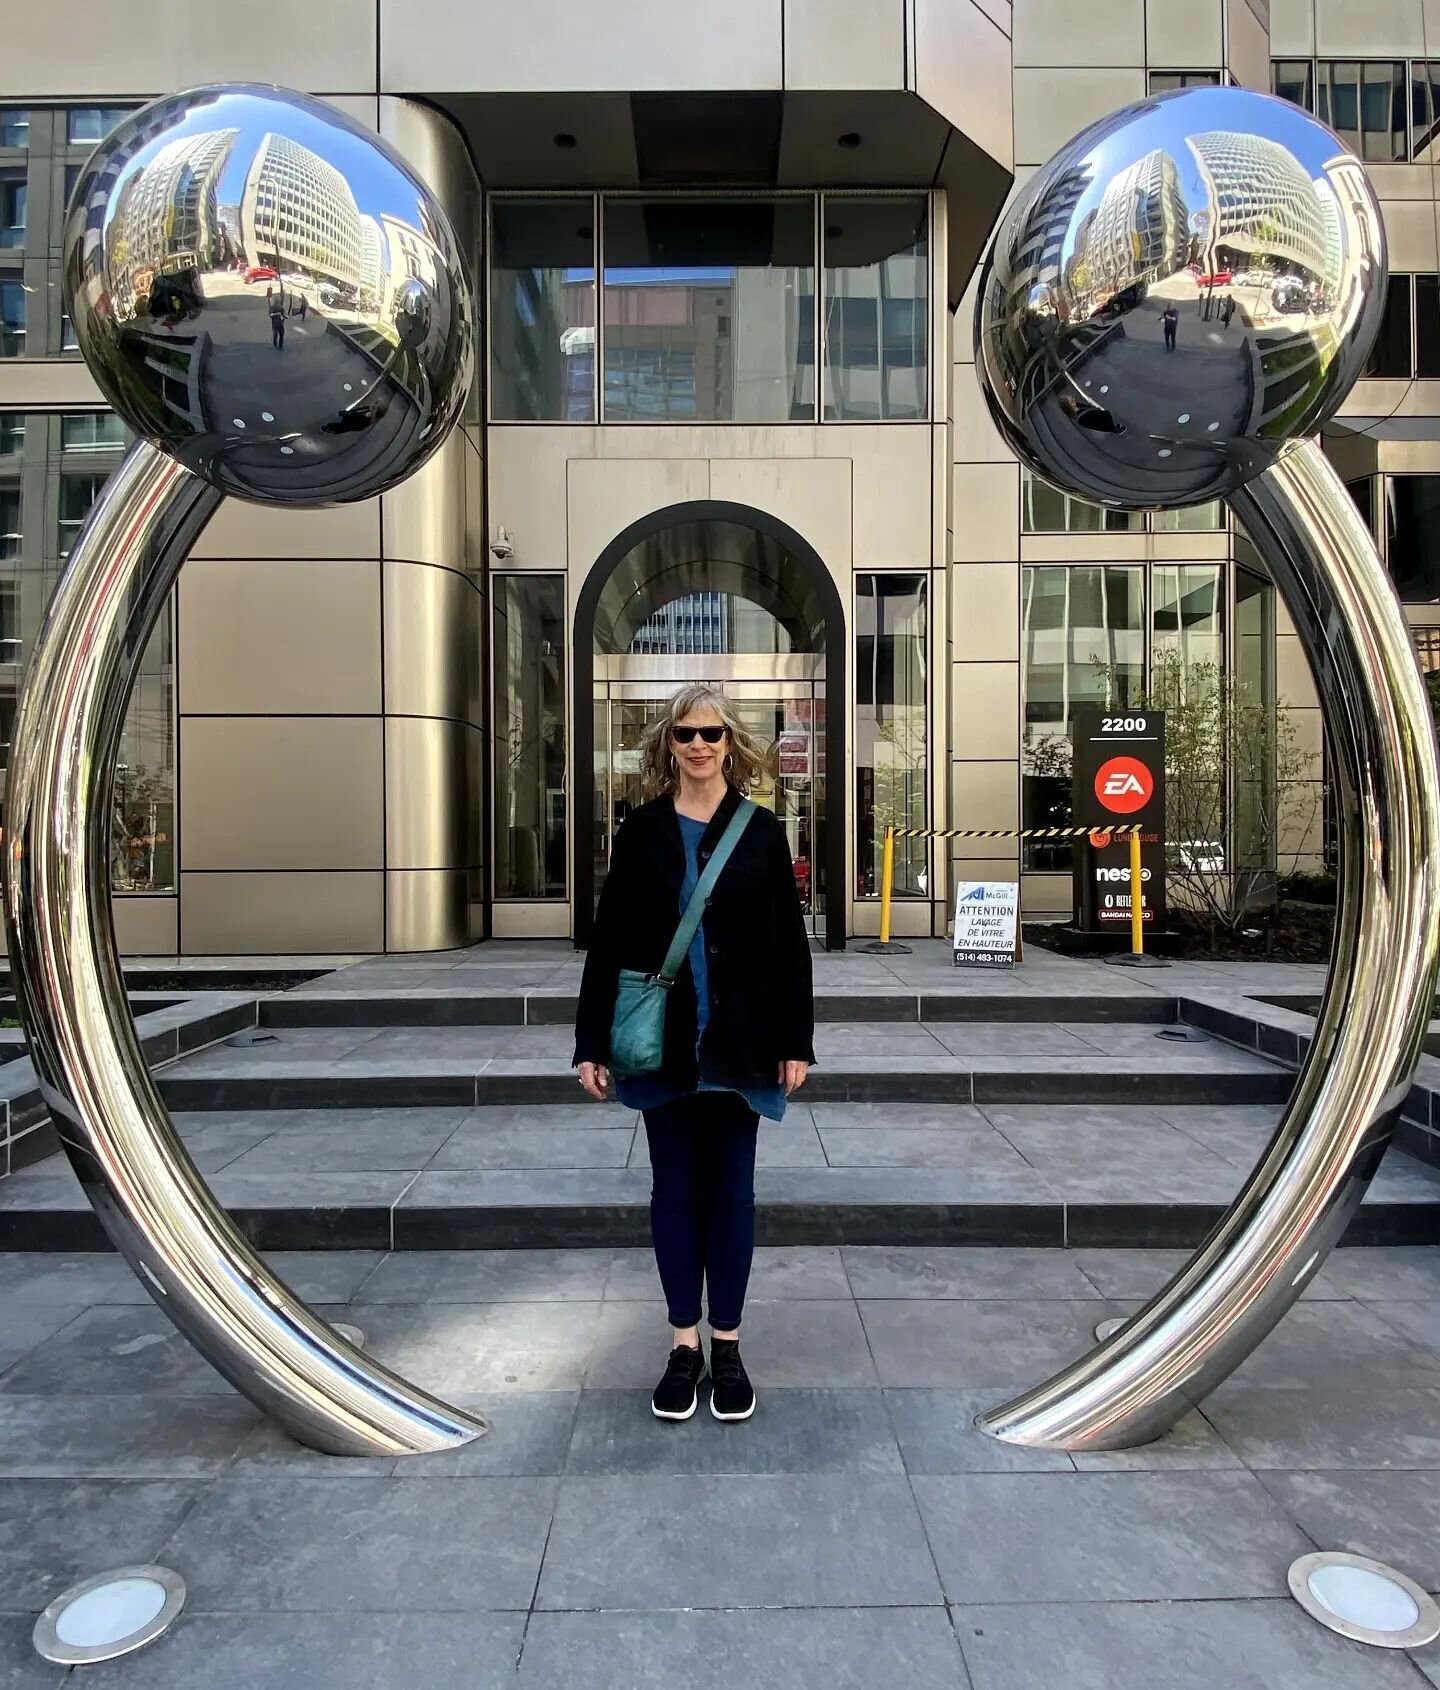 Hi, it's me in Montr&eacute;al last month with a couple of big balls. I'm here to let you know that if you're planning on seeing Life's Work: A Visual Memoir this weekend, the Victoria Arts Council will be closed July 1st and 2nd. Open again Sunday, 